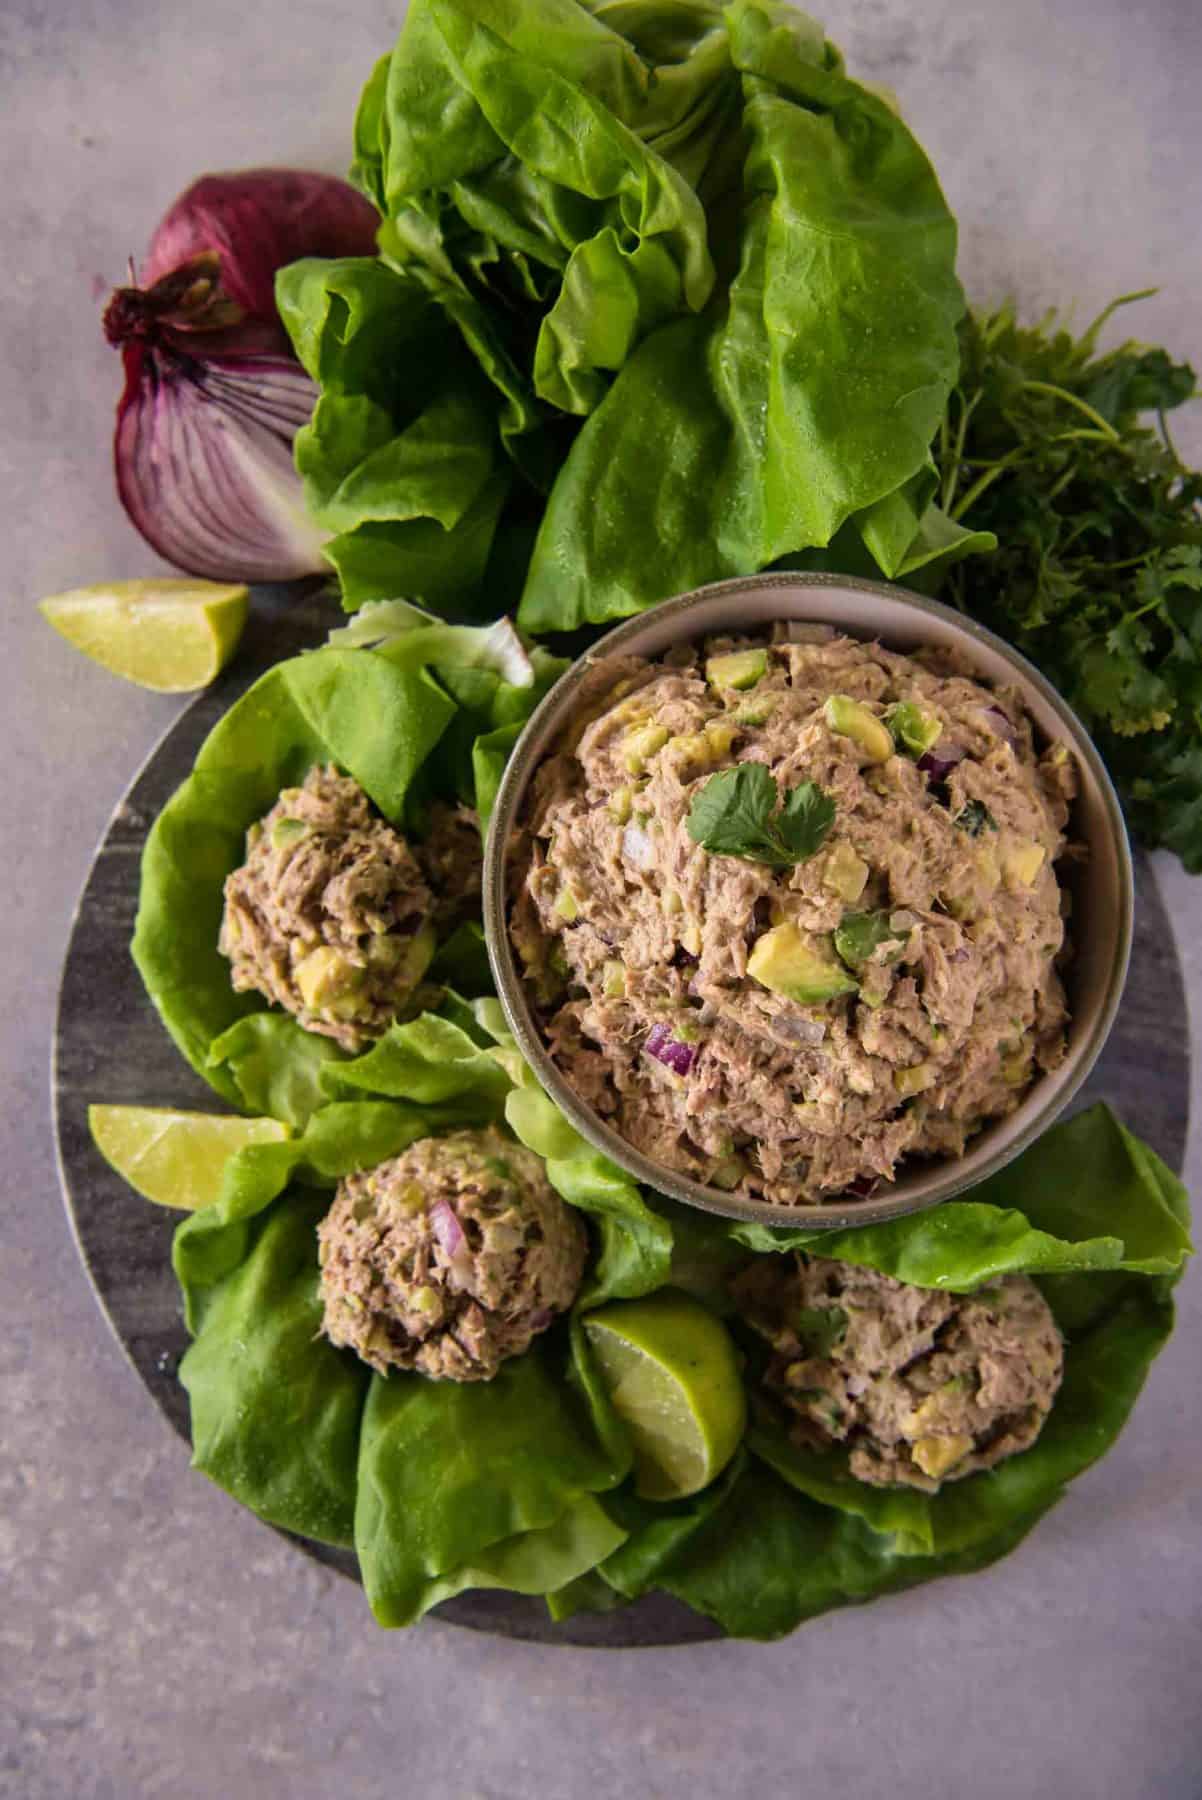 Bowl of avocado tuna salad with scoops on lettuce leaves, accompanied by slices of lime, red onion, and fresh herbs on a gray surface.